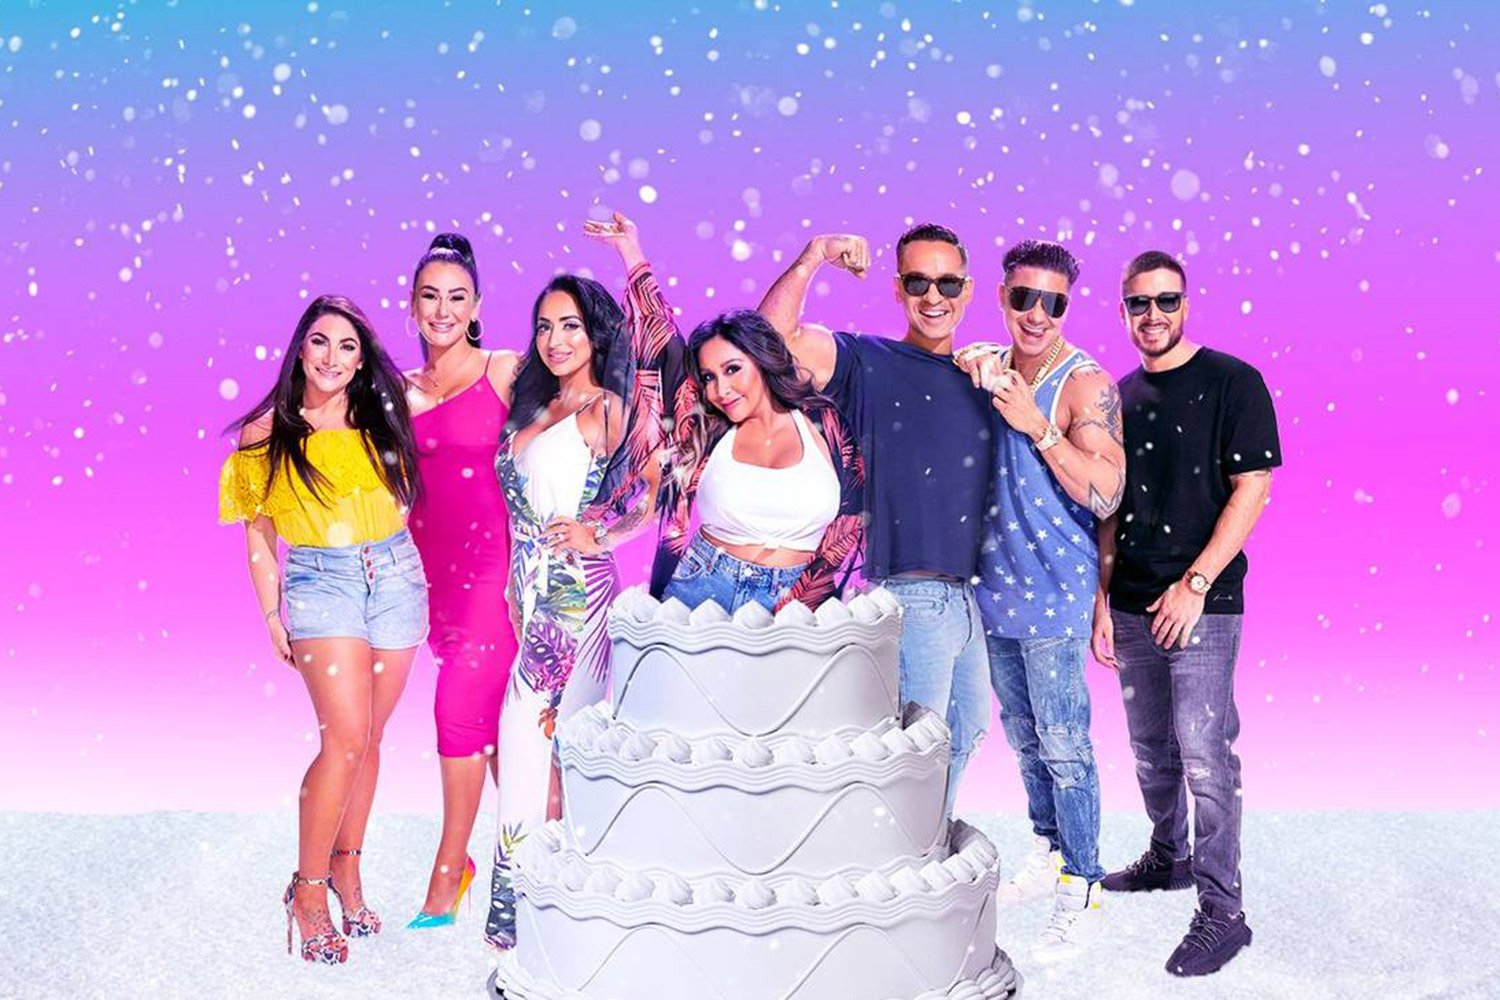 Deena Cortese, Jenni 'JWoww' Farley, Angelina Pivarnick, Nicole 'Snooki' Polizzi popping out of a cake, Mike 'The Situation' Sorrentino, DJ Pauly D, and Vinny Guadagnino in a promotional image for 'Jersey Shore: Family Vacation'